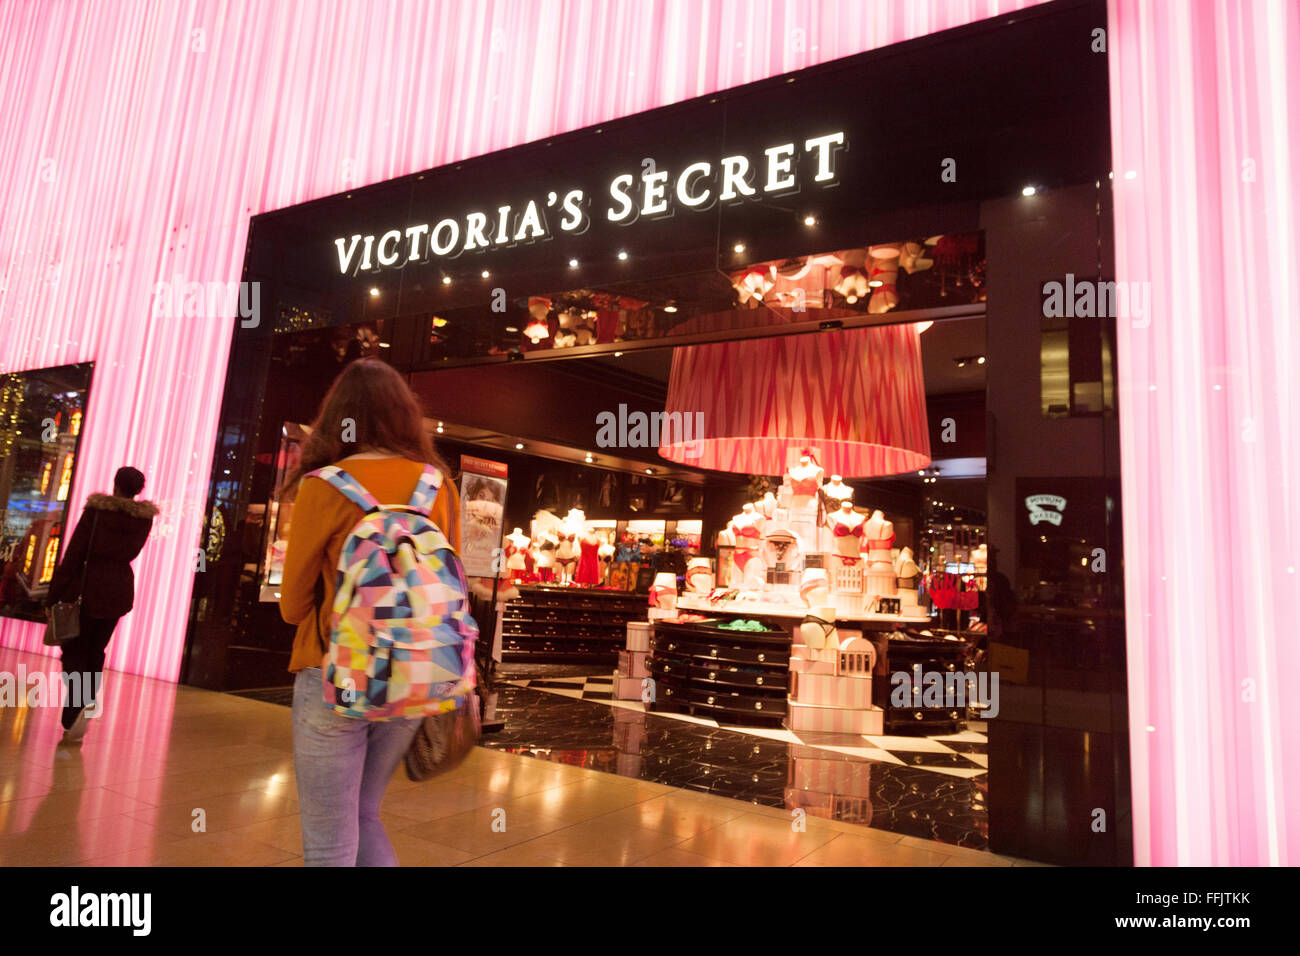 Getting ready to watch the 2014 Victoria's Secret Fashion ShowLove  It!*ﾟ❄∘*. ♡*ﾟ❄∘*. ♡